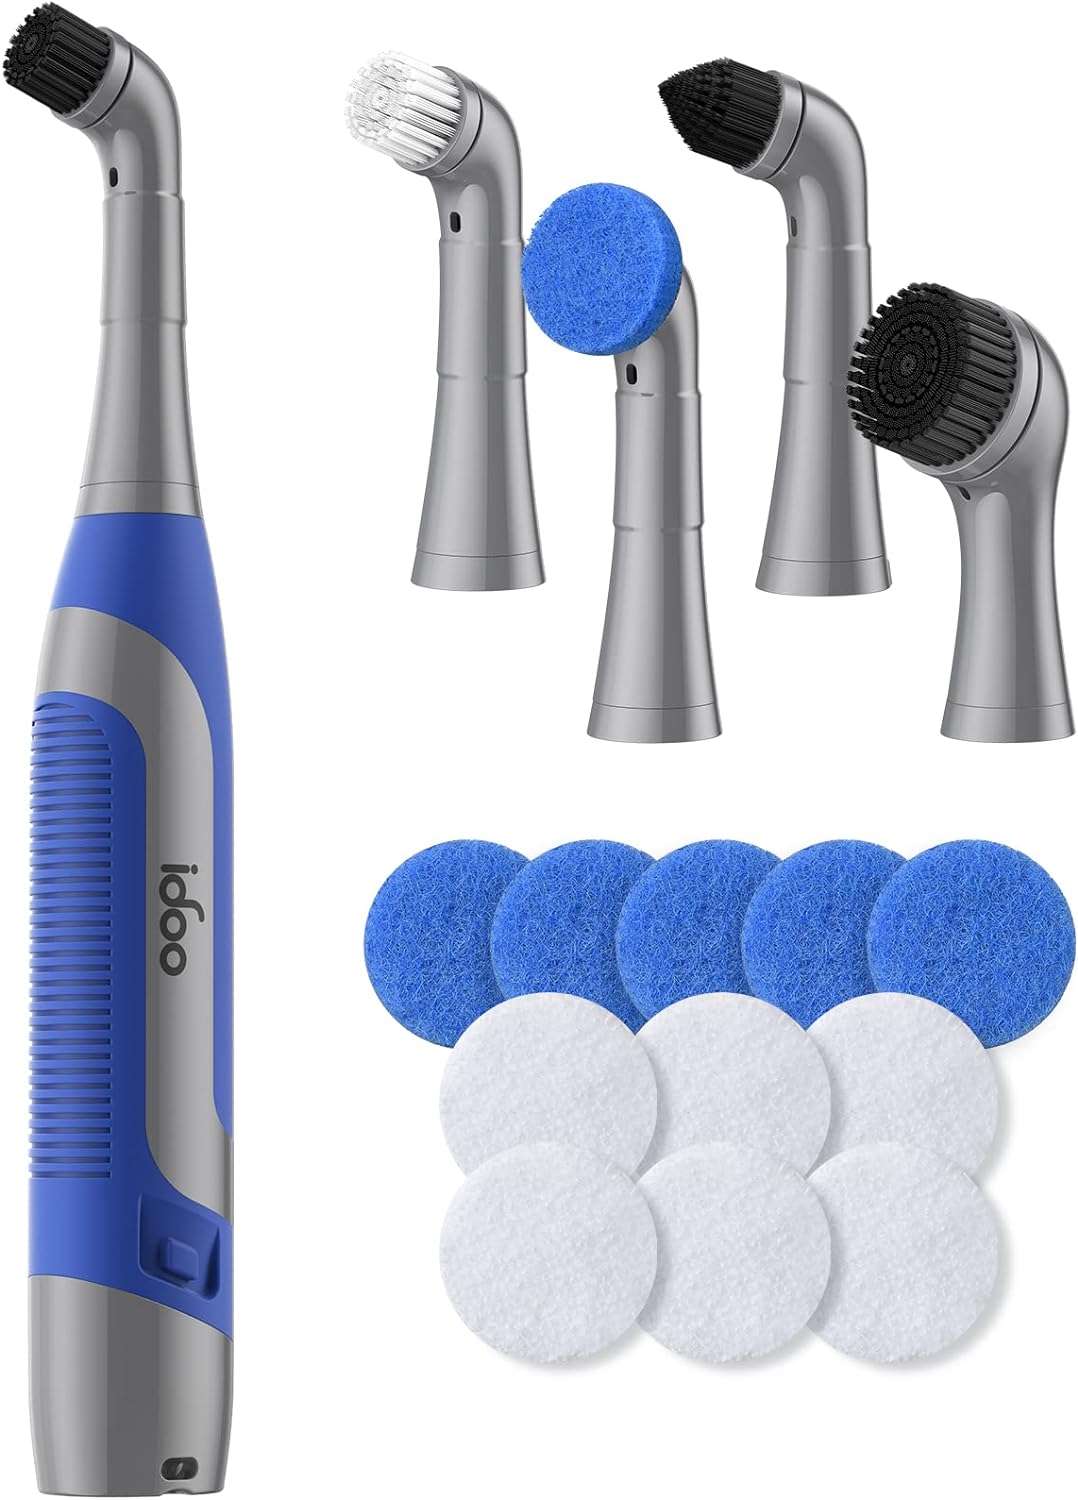 iDOO Cordless Electric Cleaning Brush